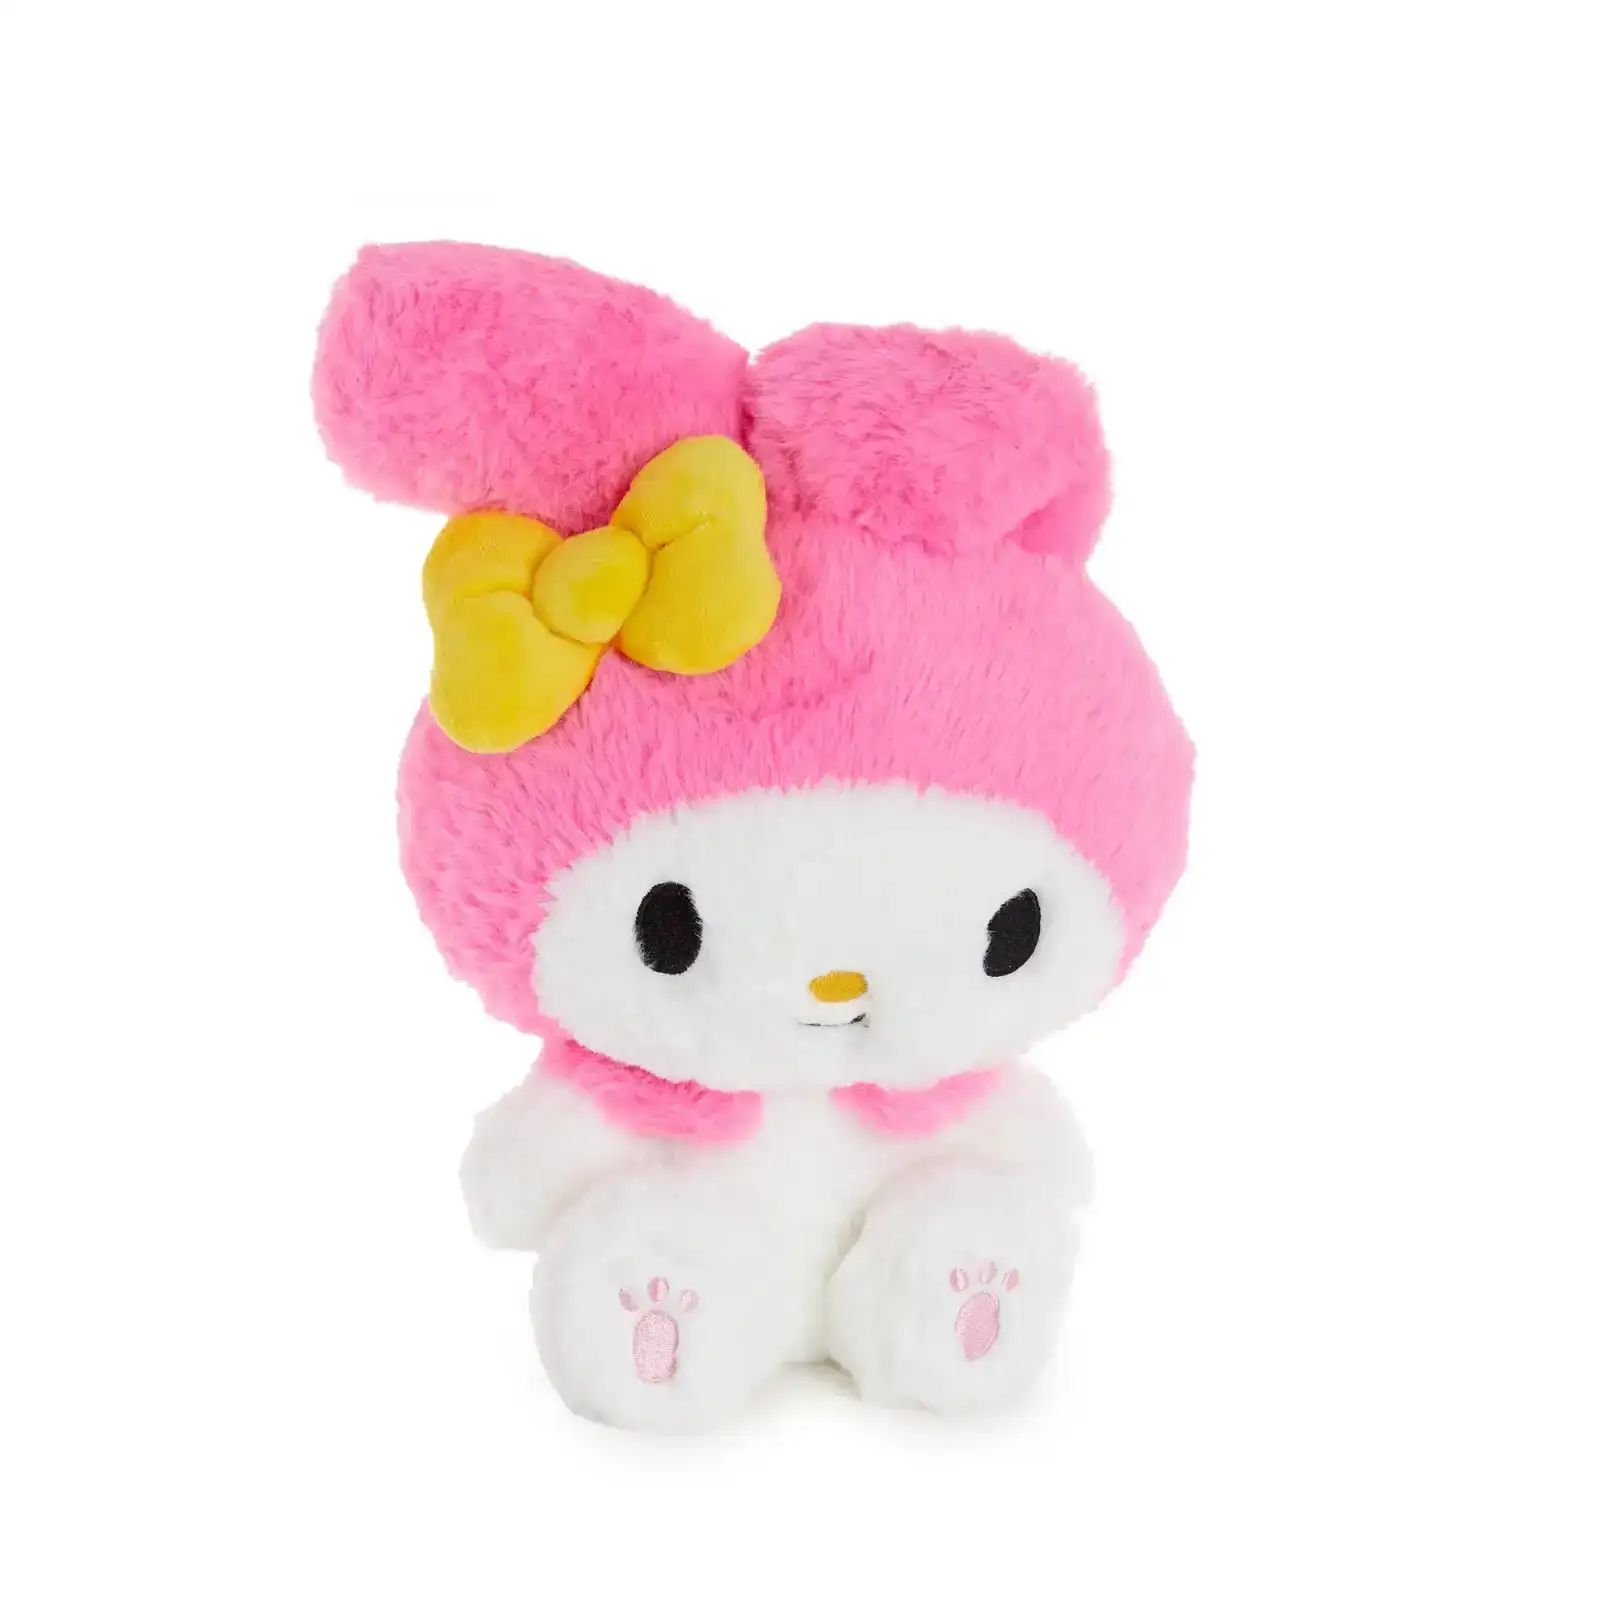 Image of My Melody 10" Plush (Classic Series)